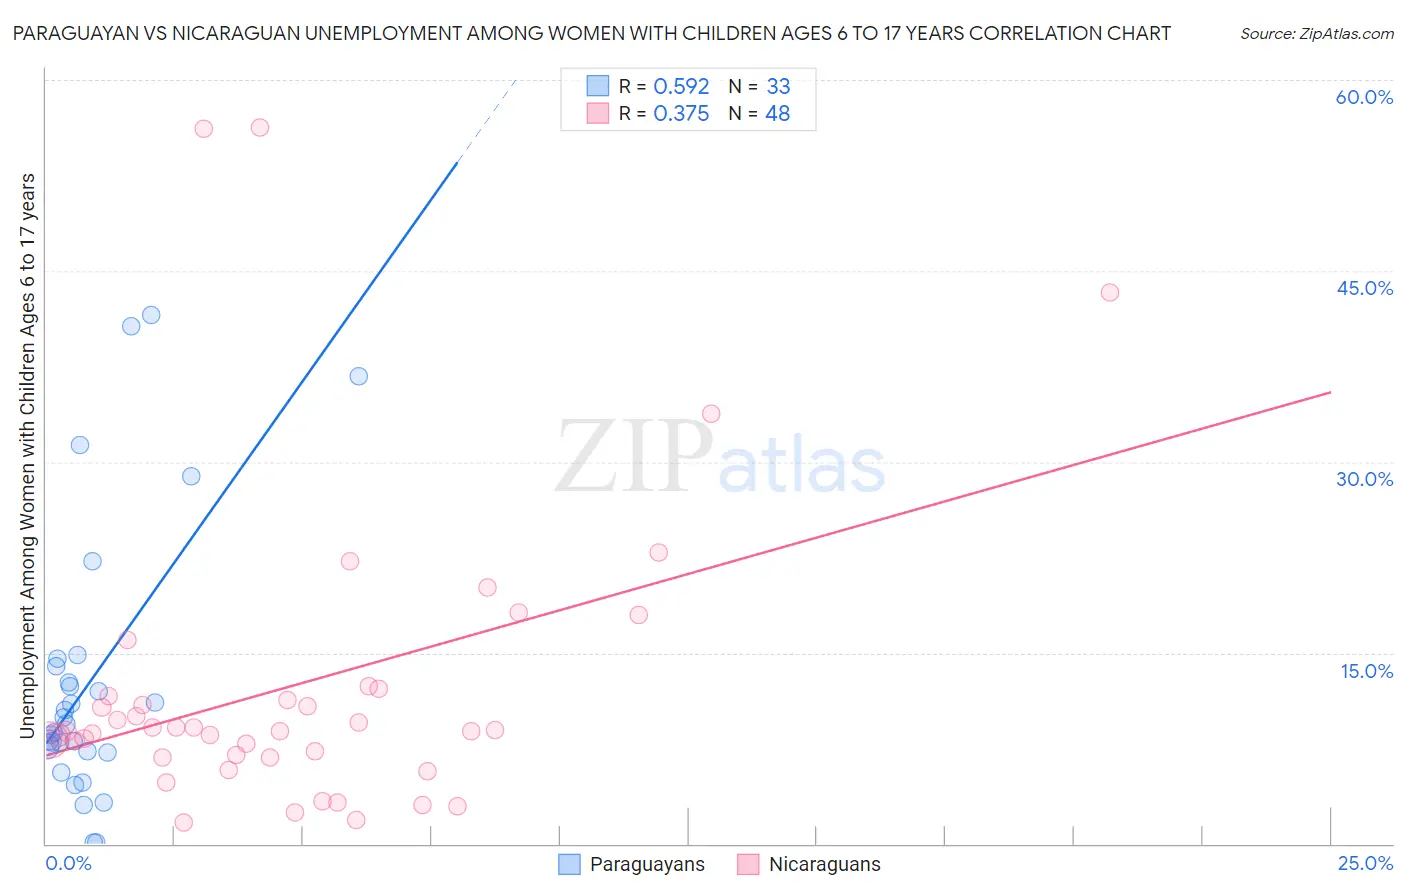 Paraguayan vs Nicaraguan Unemployment Among Women with Children Ages 6 to 17 years